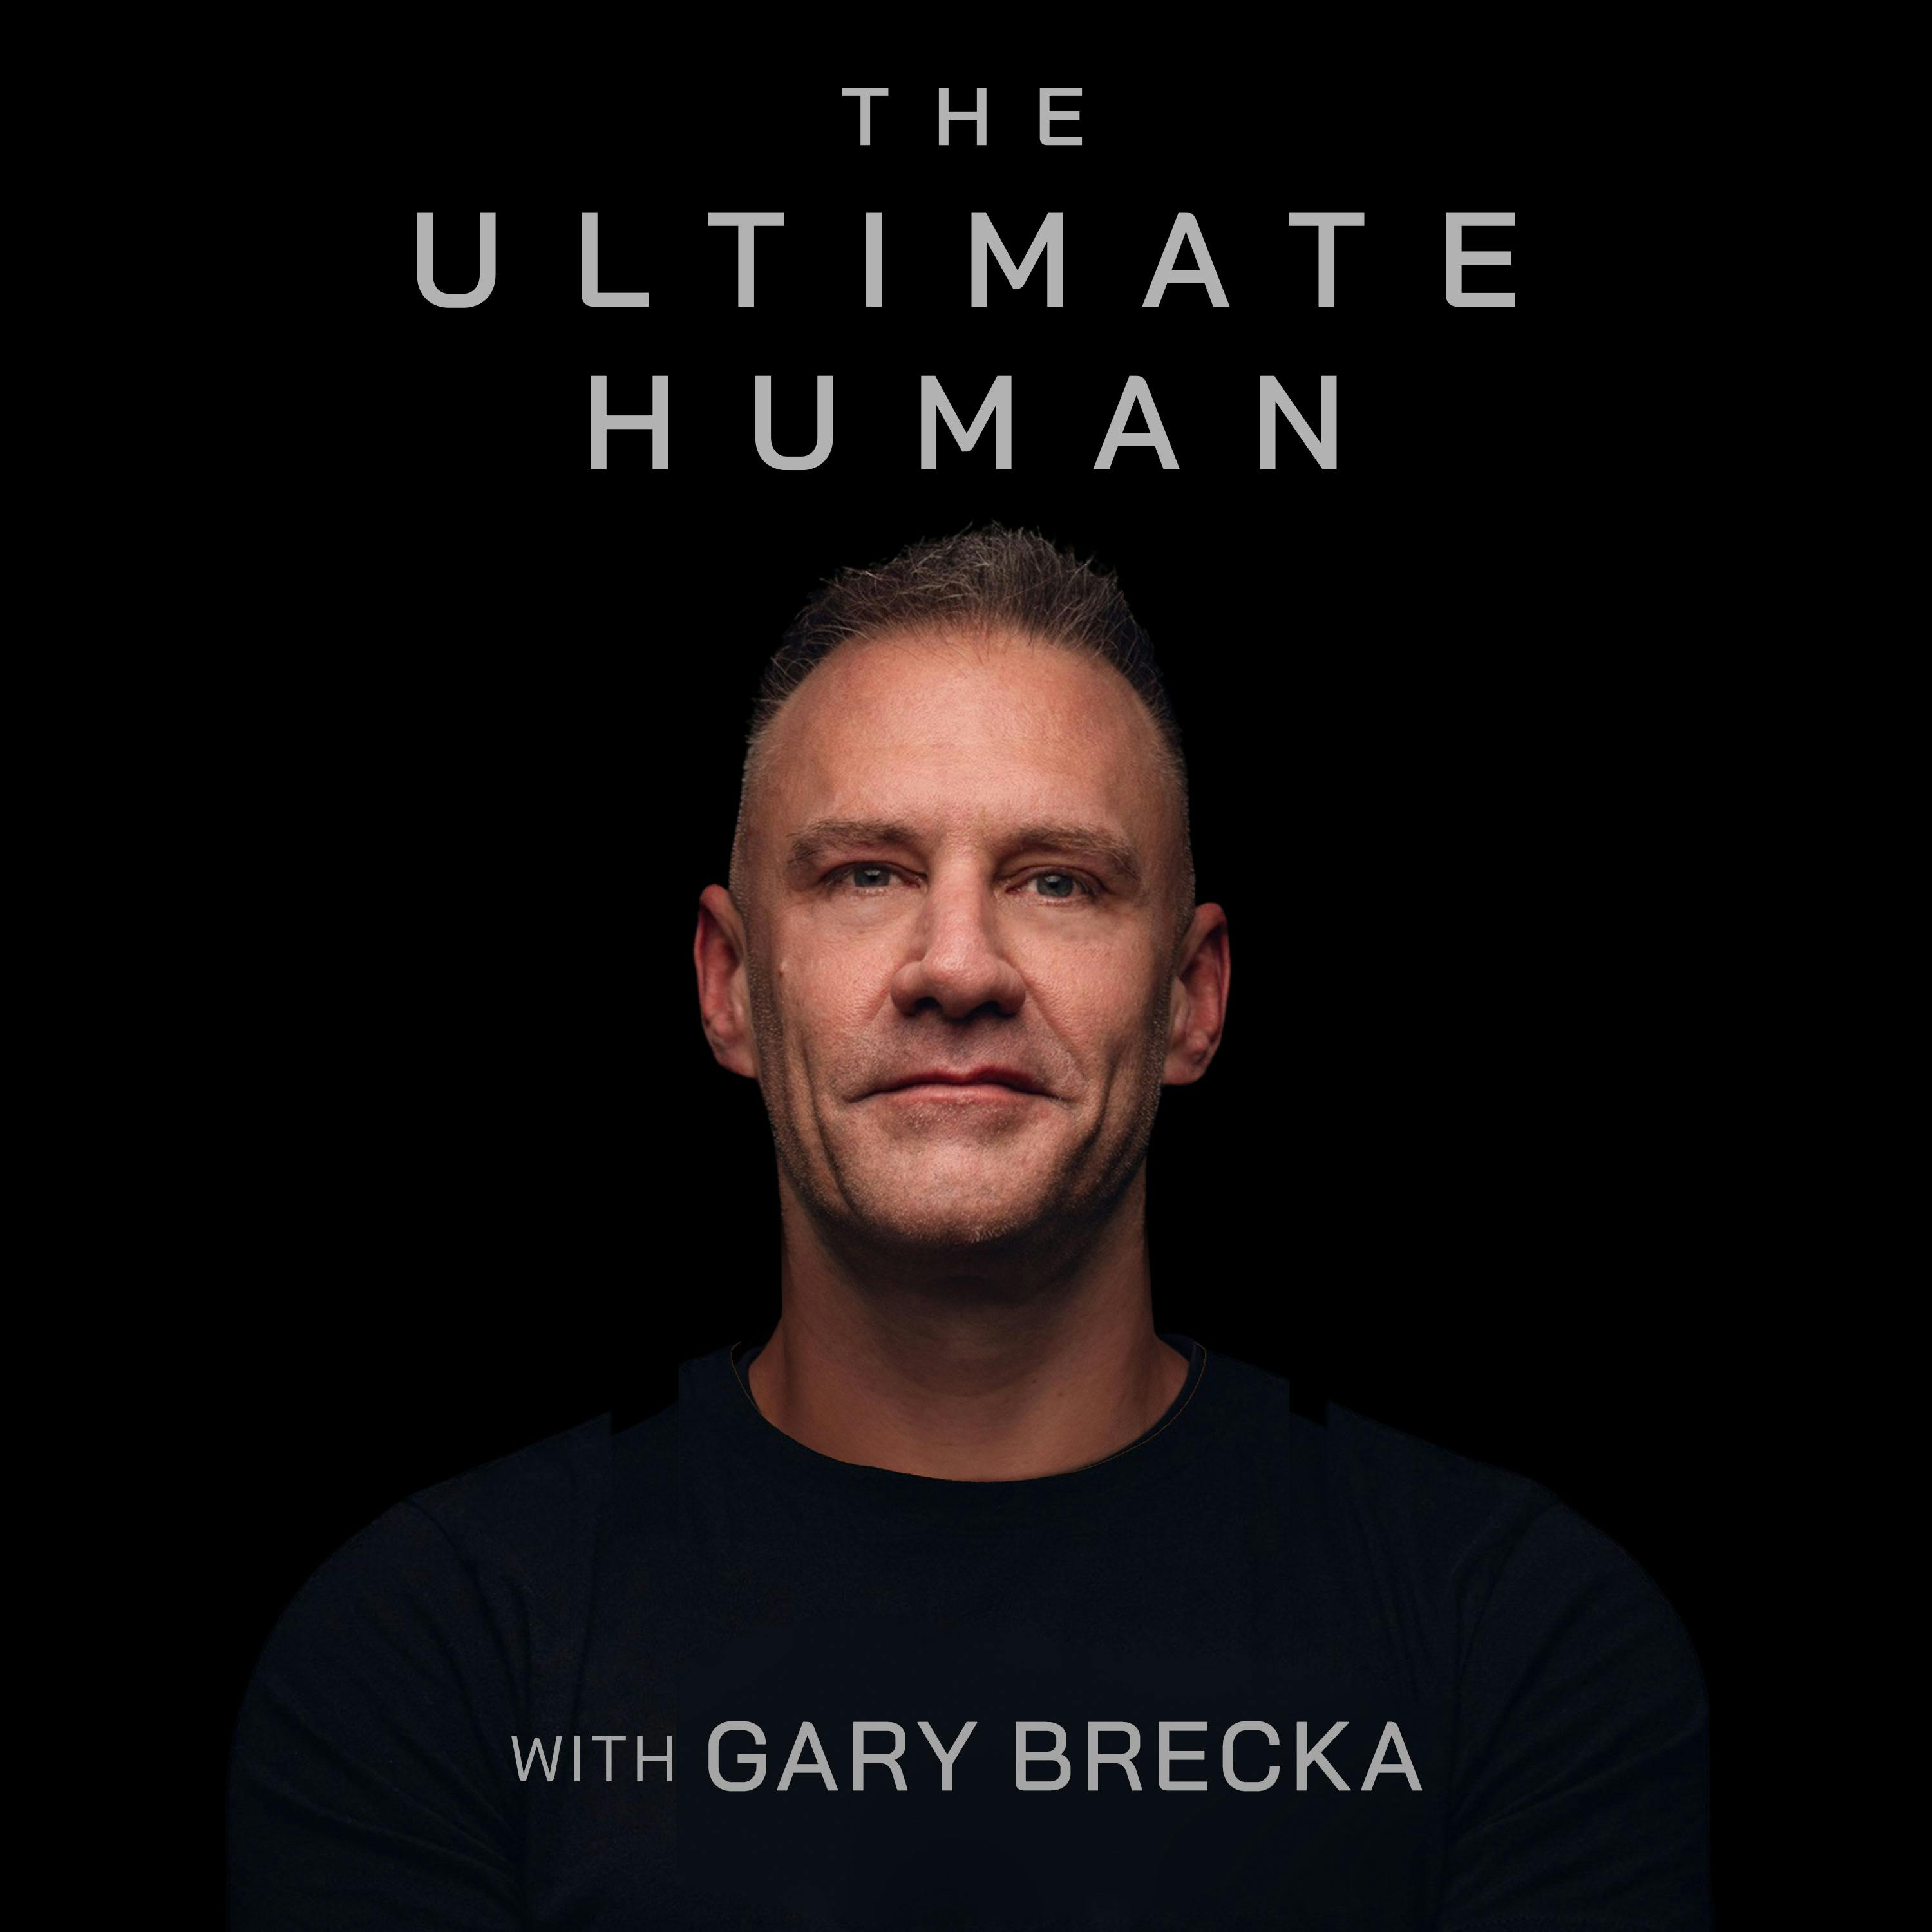 The Ultimate Human with Gary Brecka by Gary Brecka